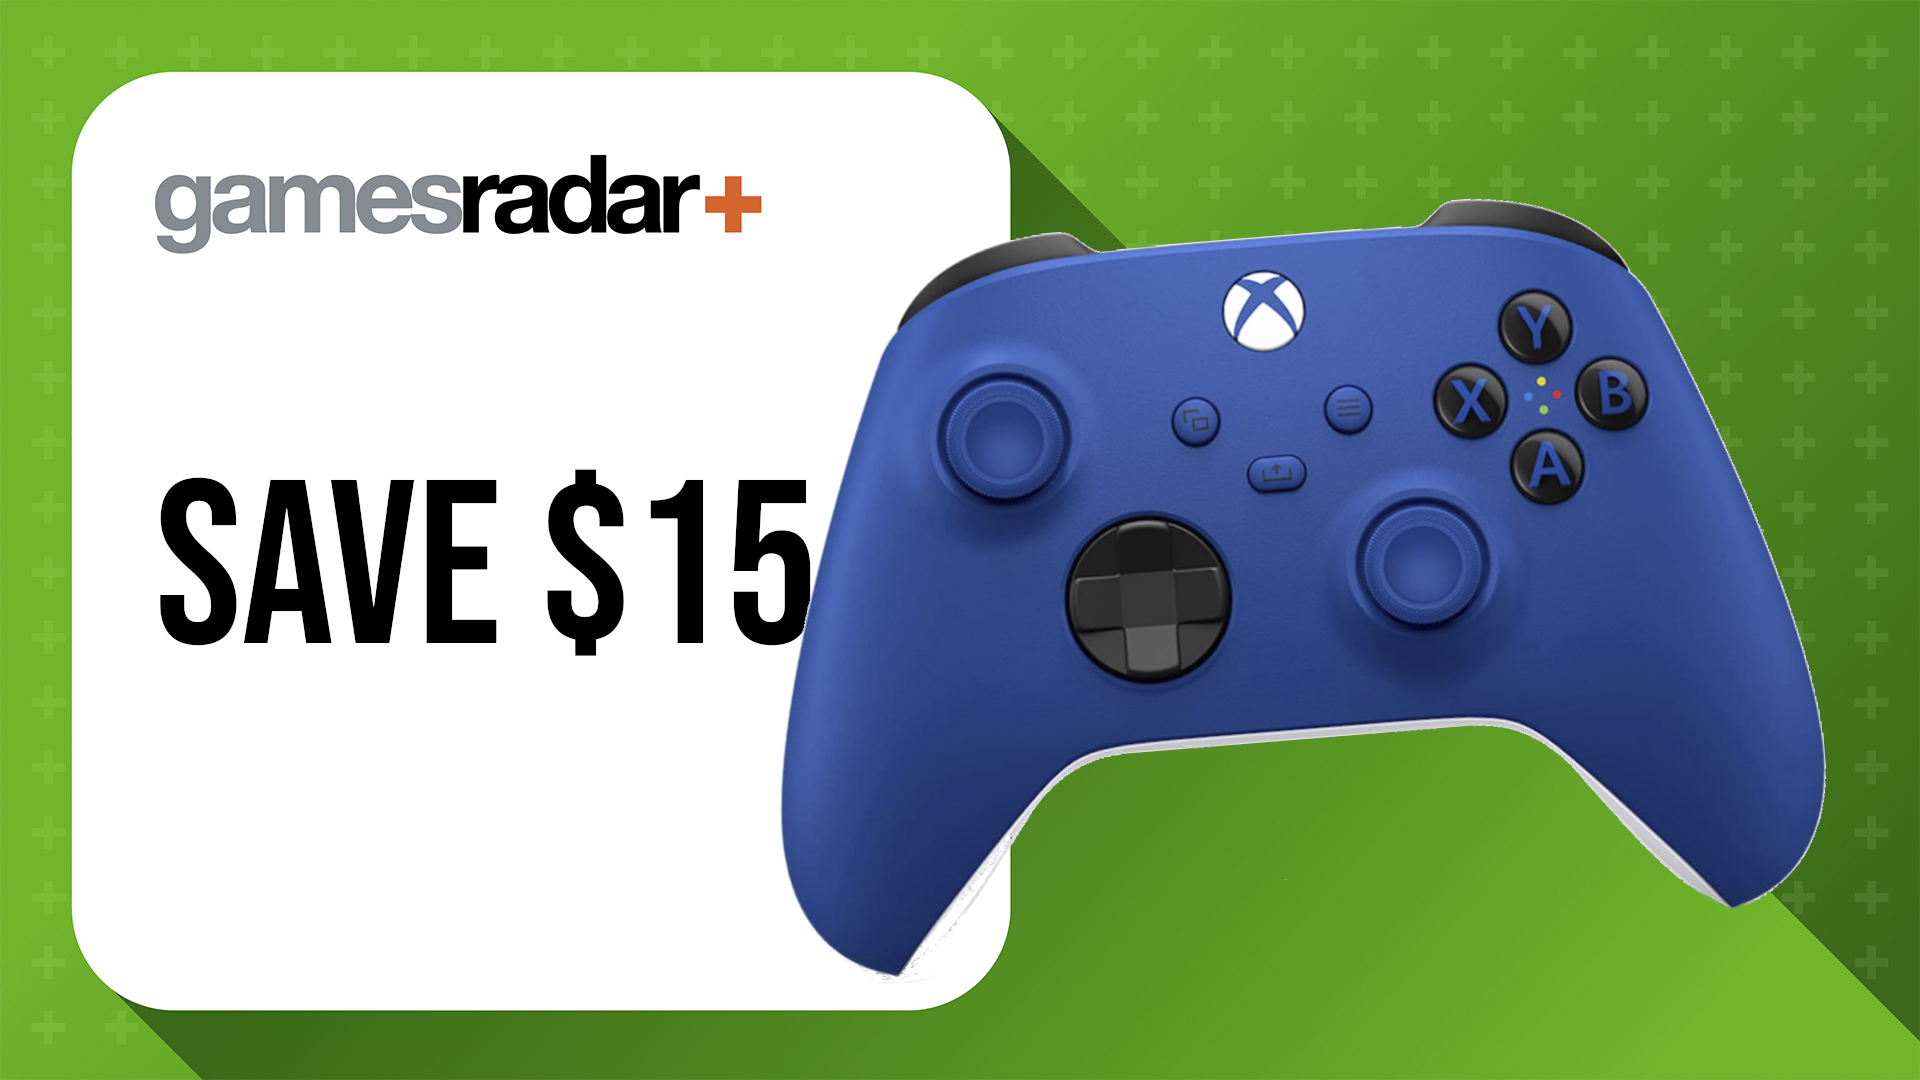 Amazon Prime Day Xbox sales with Shock Blue Xbox controller